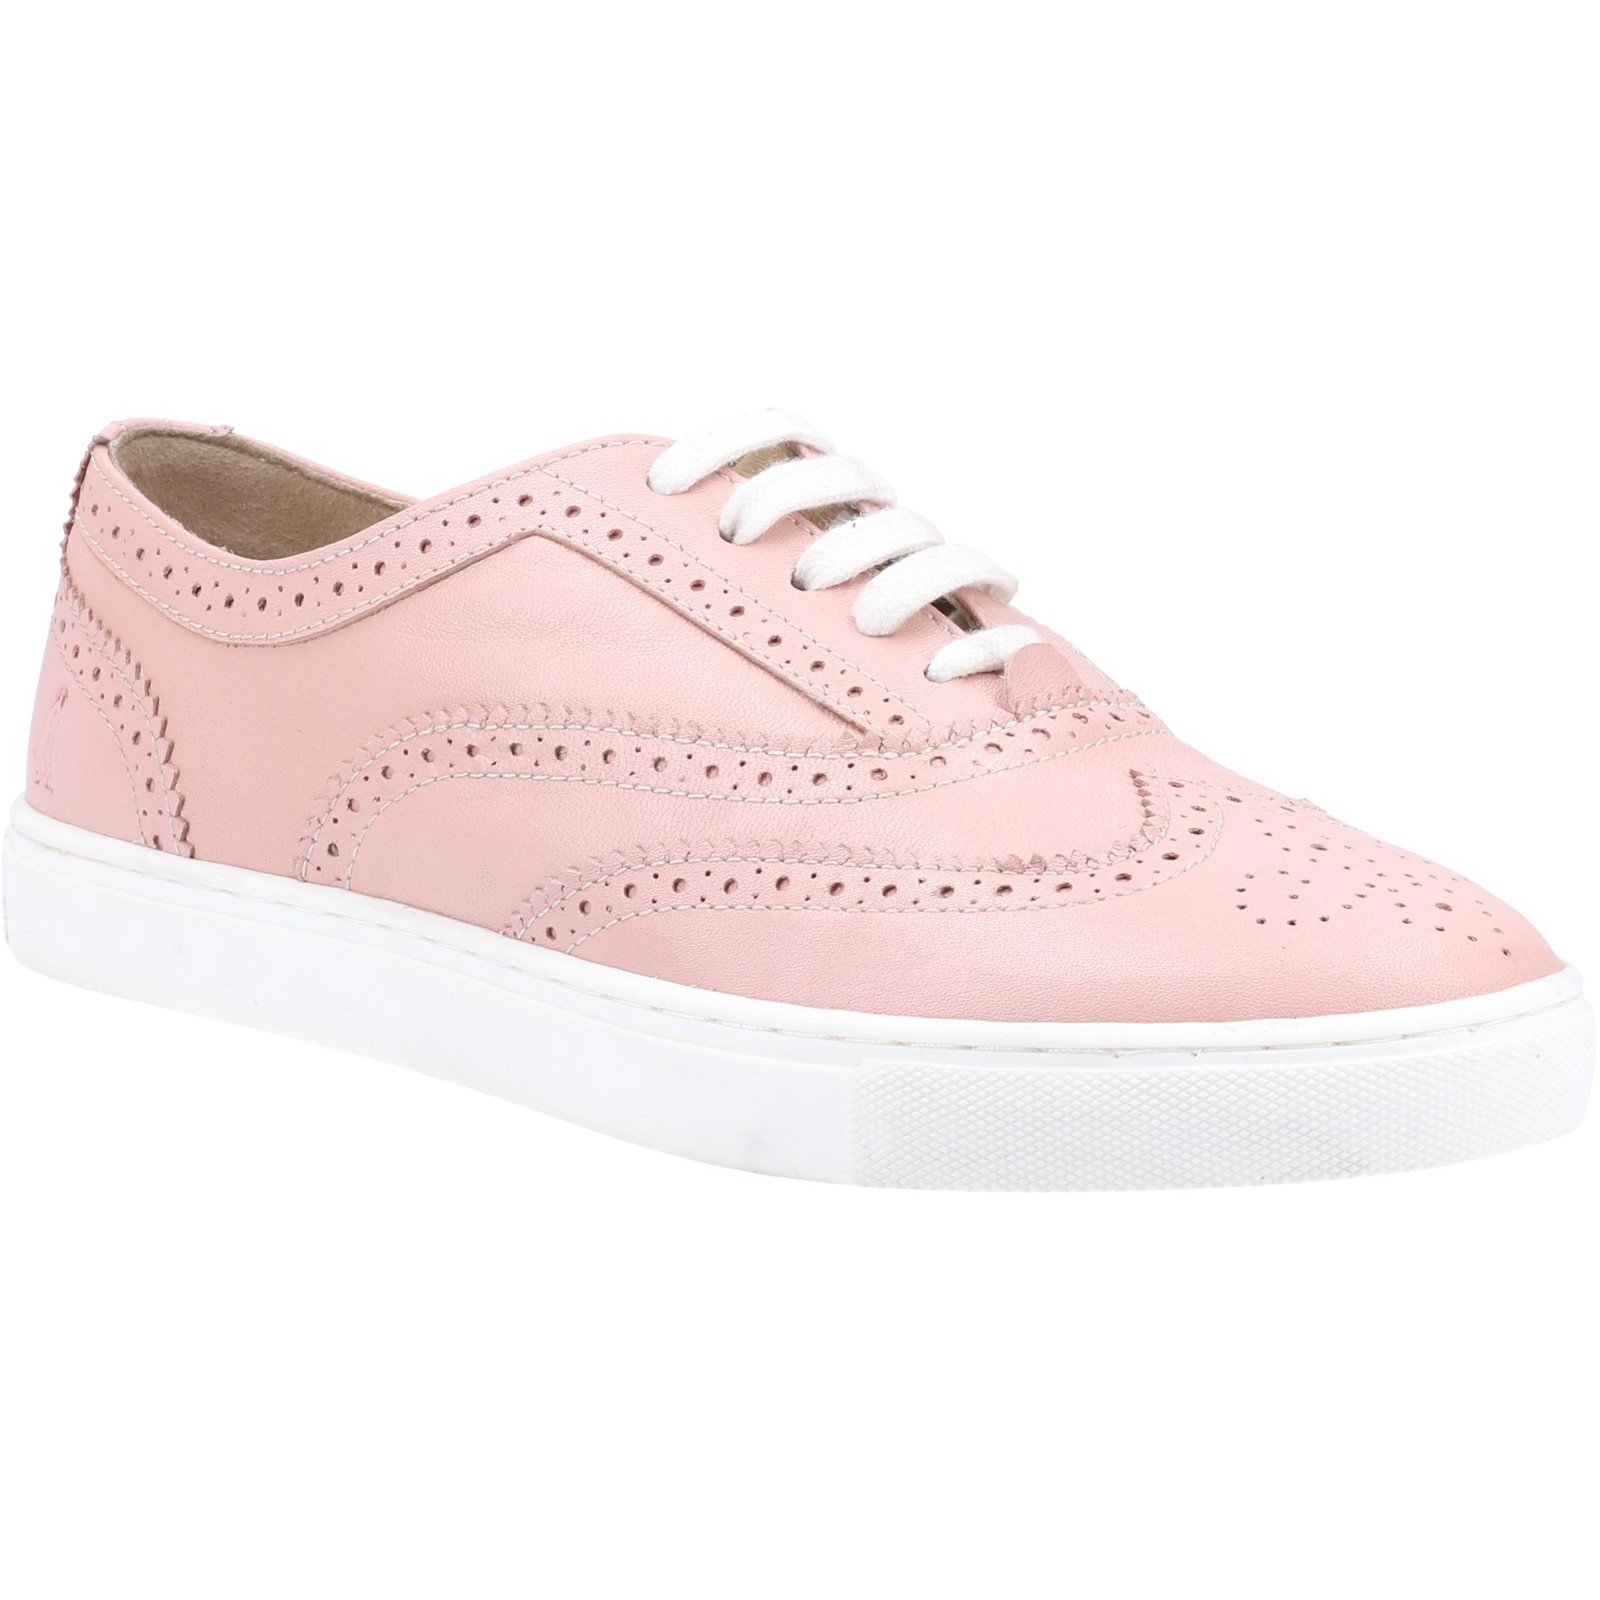 Hush Puppies Women's Tammy Trainer Various Colours 32847 - Blush 4